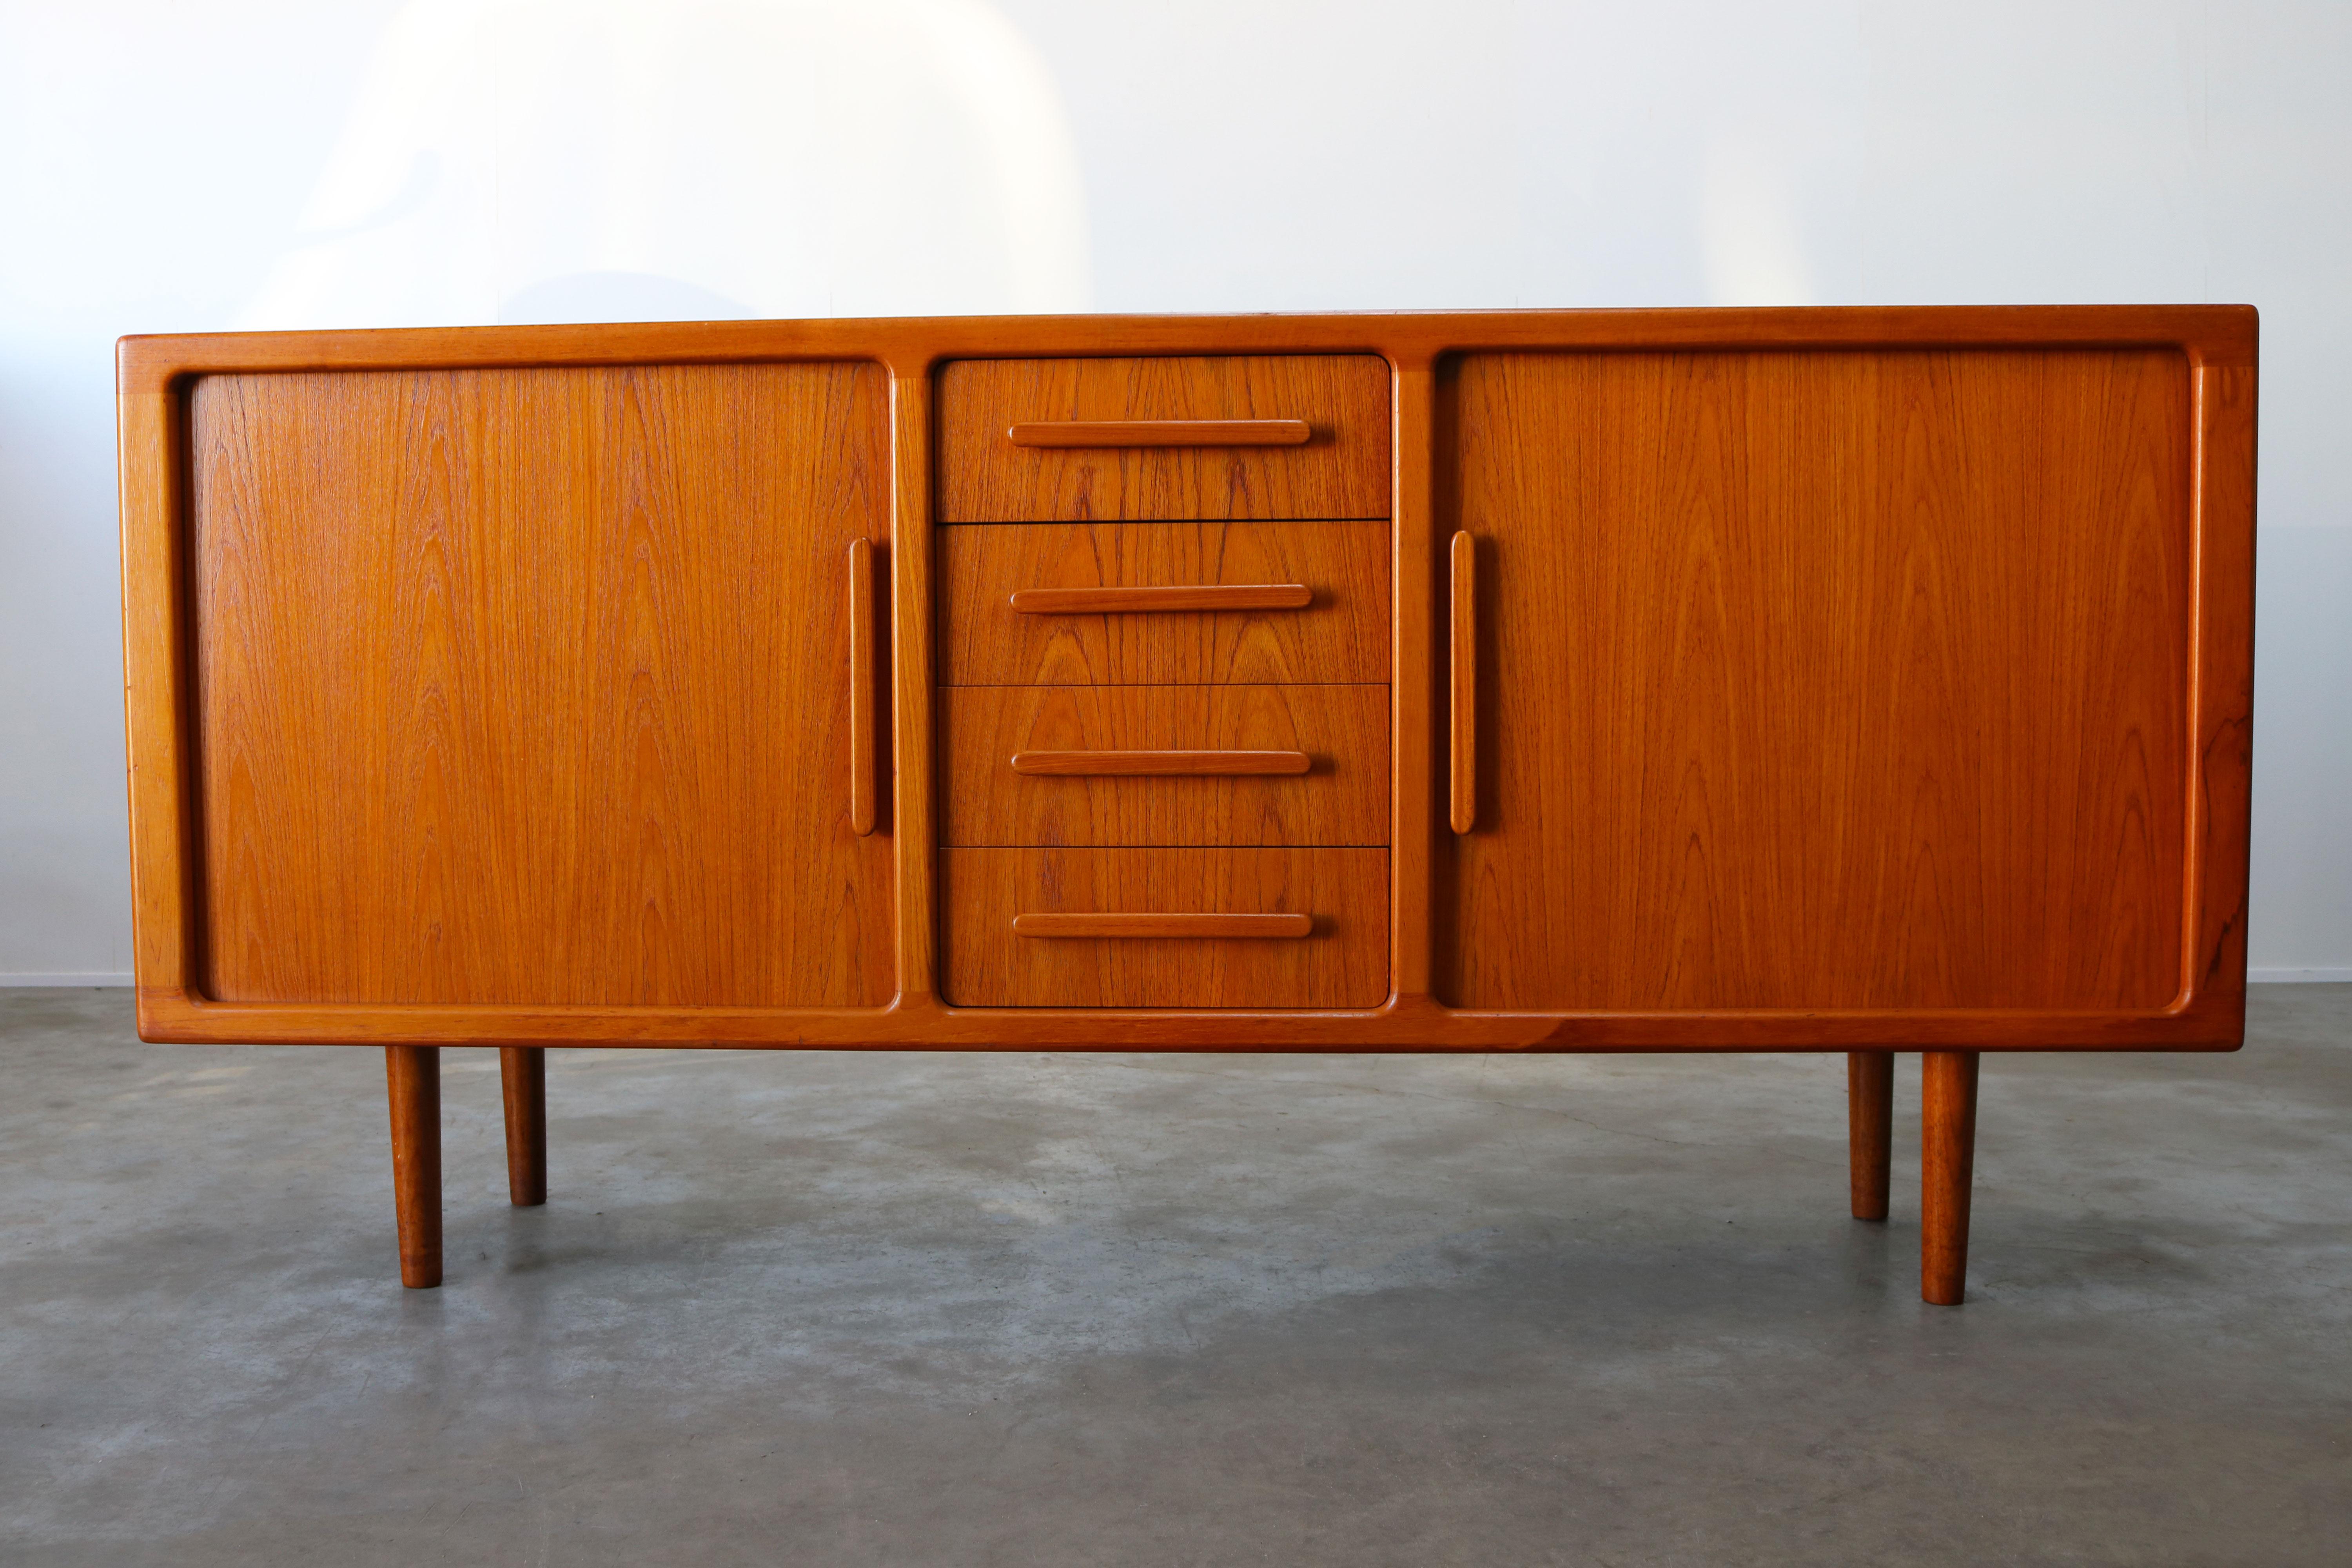 Danish design credenza / sideboard attributed to Johannes Andersen for the Danish furniture company Silkeborg. Wonderful piece of Danish design the sideboard has 2 tambour doors which disappear completely when opened and 4 drawers. The wood grain